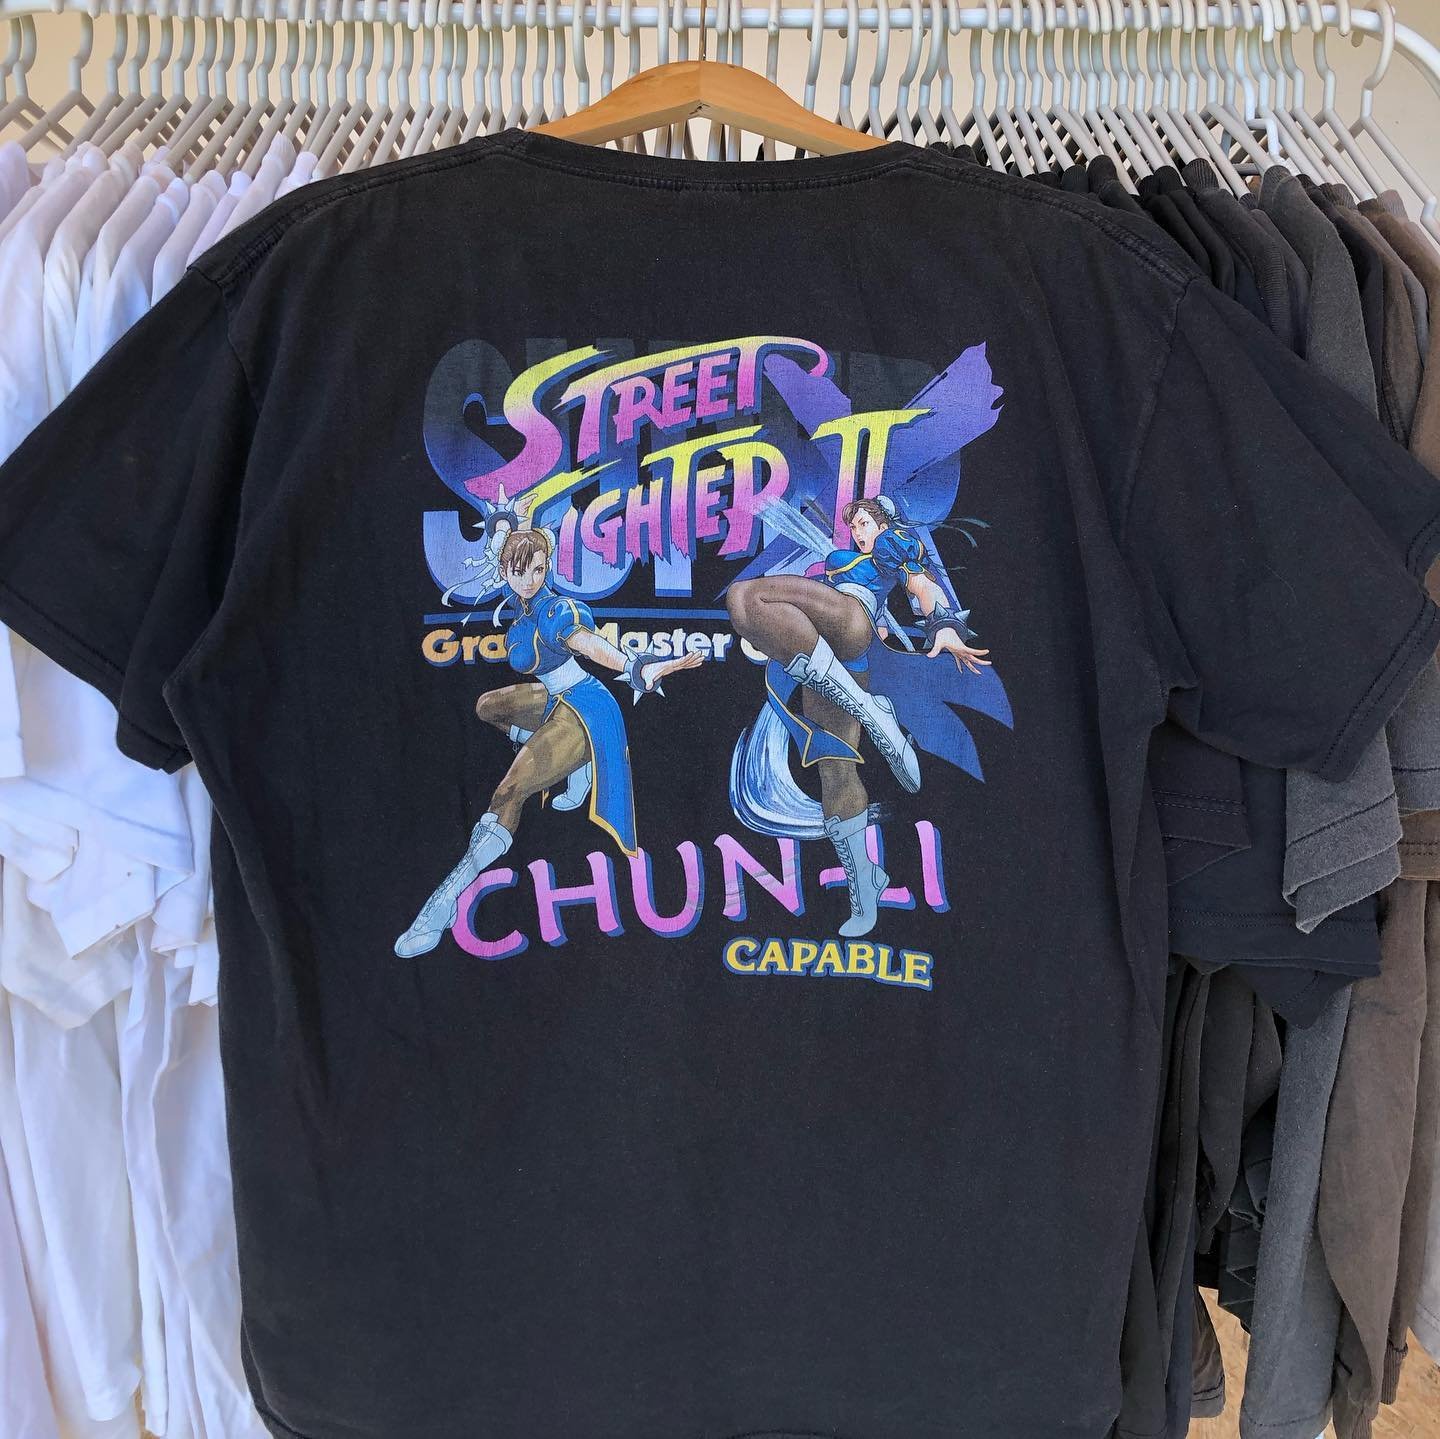 FIGHT!
Found another Chun-Li baby.

🪡 Fits XL, Heavy cotton, Boxy fit, graphics in impeccable condition
💰 Slide in, this won&rsquo;t stay for long!